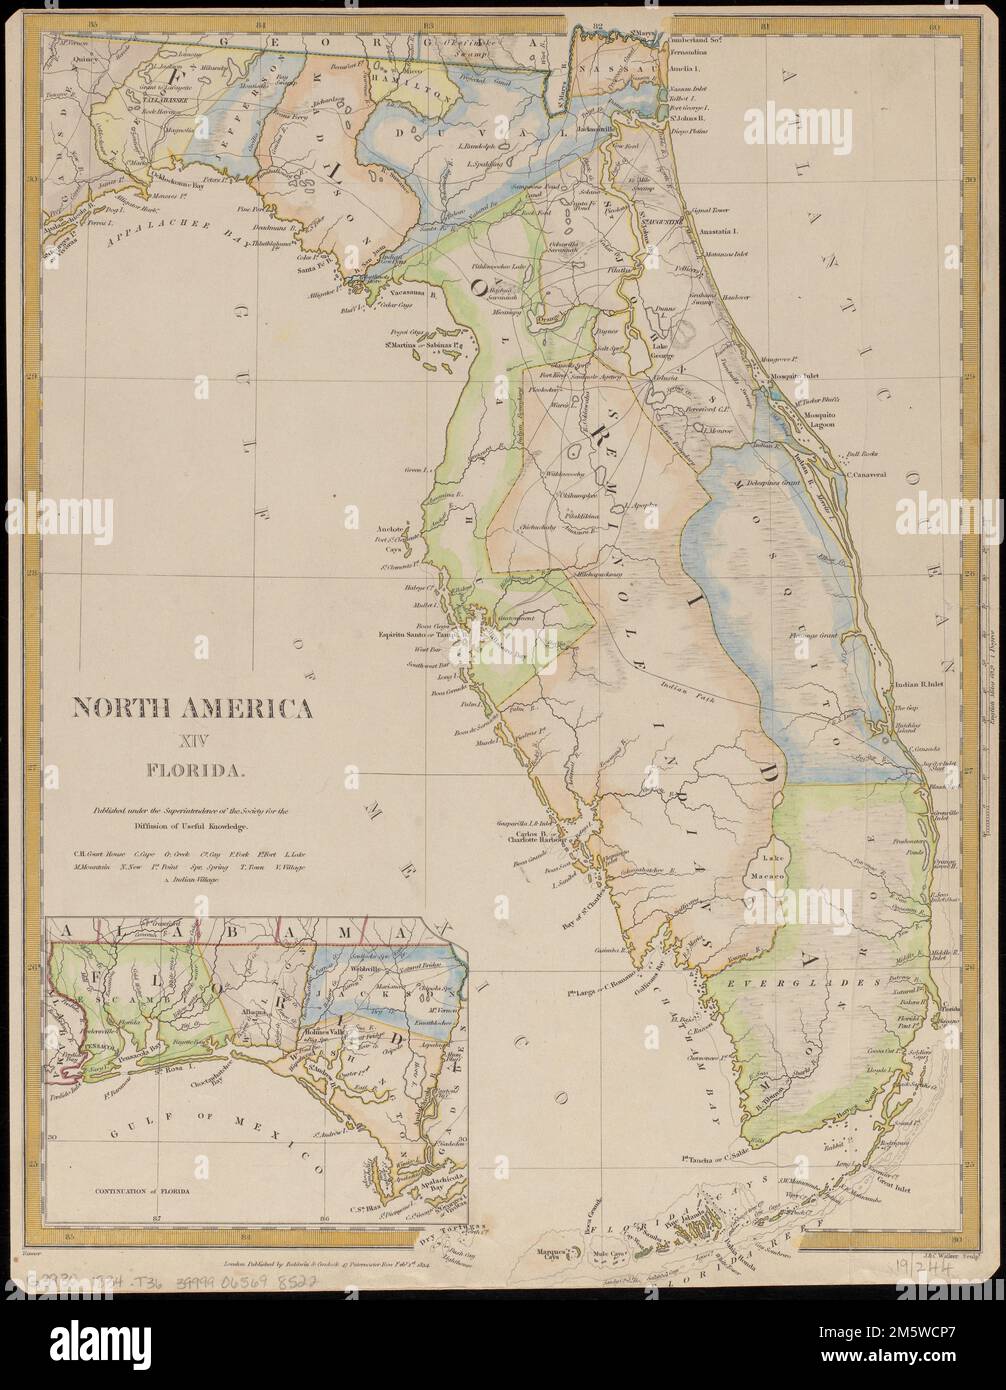 North America : Florida. Feby. 1st 1834. 'Published under the superintendence of the Society for the Diffusion of Useful Knowledge.' Inset: Continuation of Florida... North America, XIV, Florida. North America, XIV, Florida, Florida Stock Photo